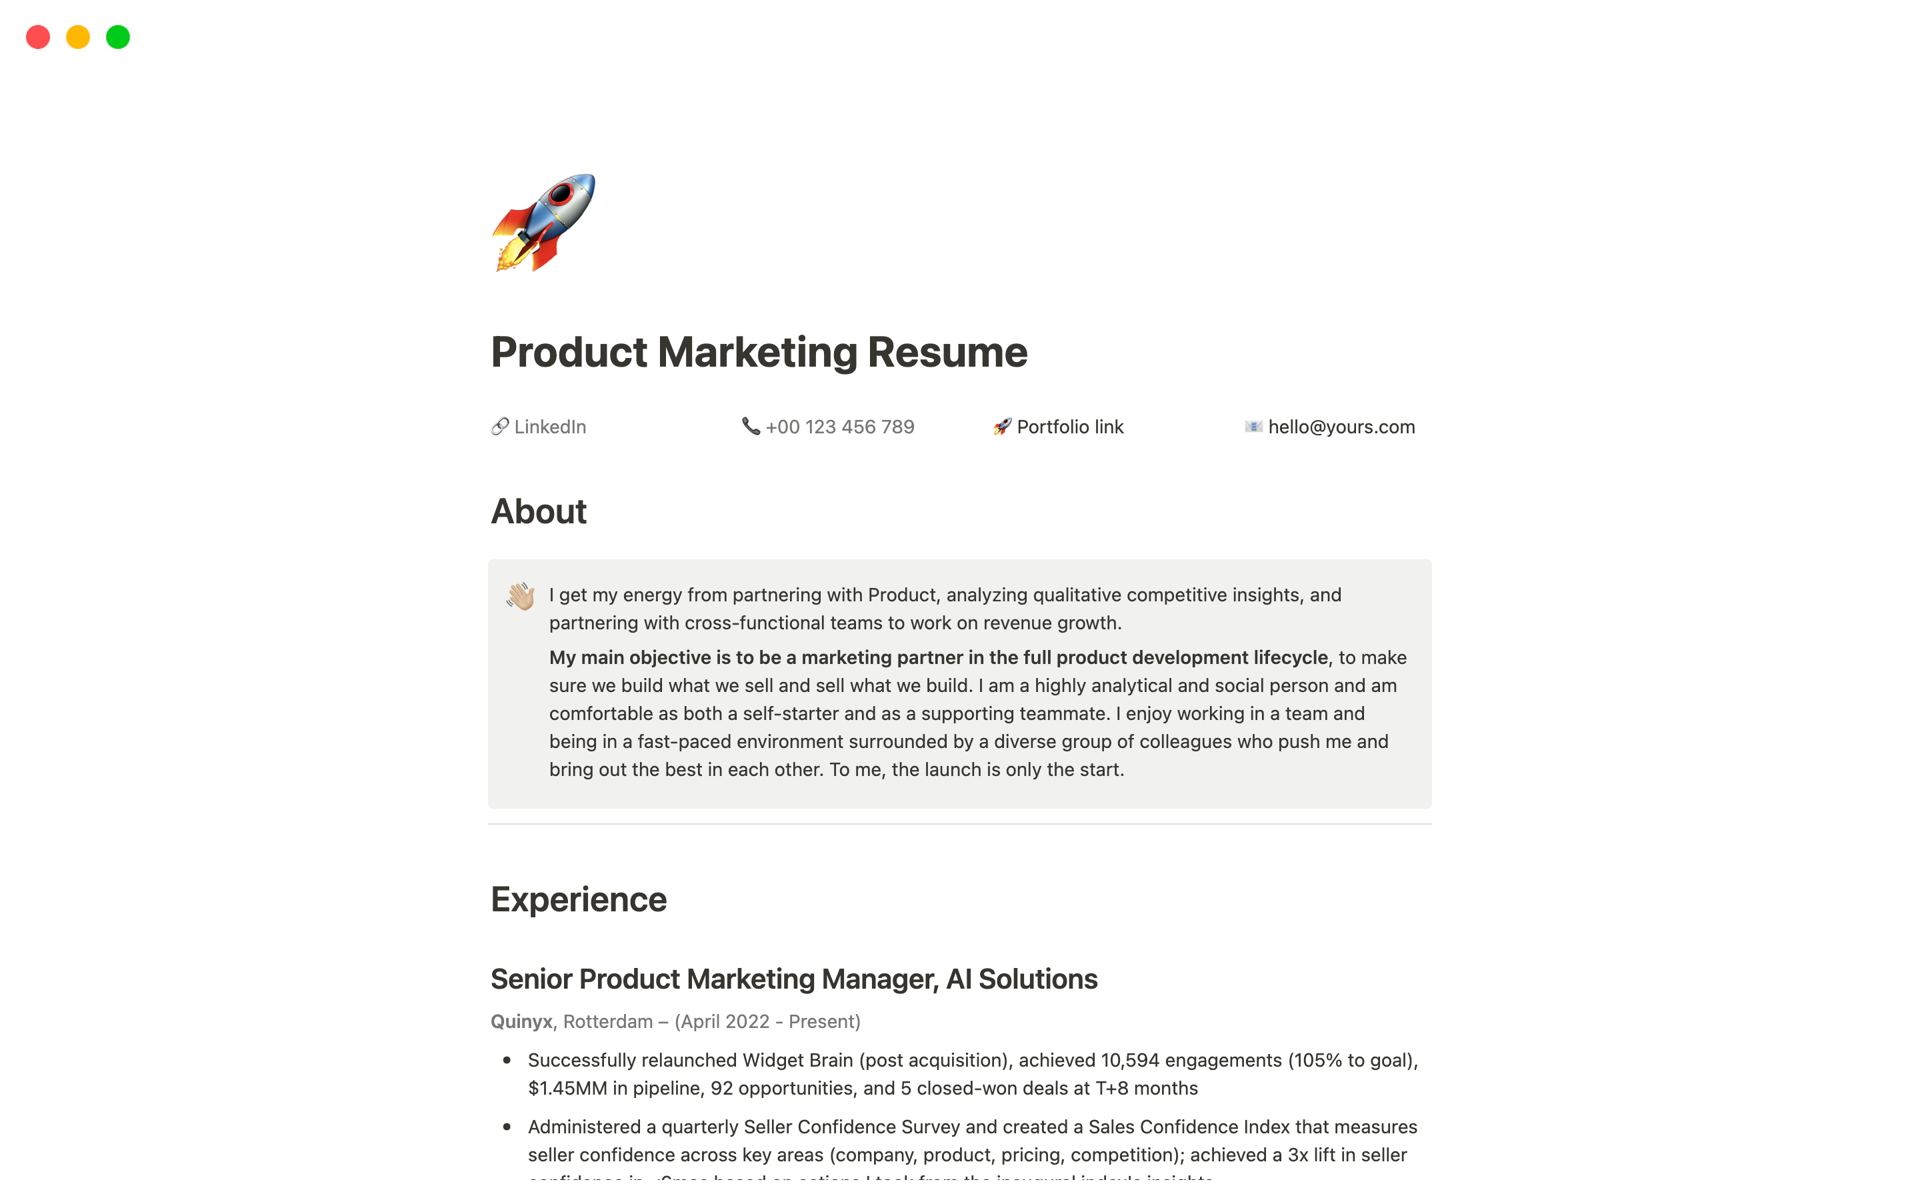 Create a professional Product Marketing resume in Notion.